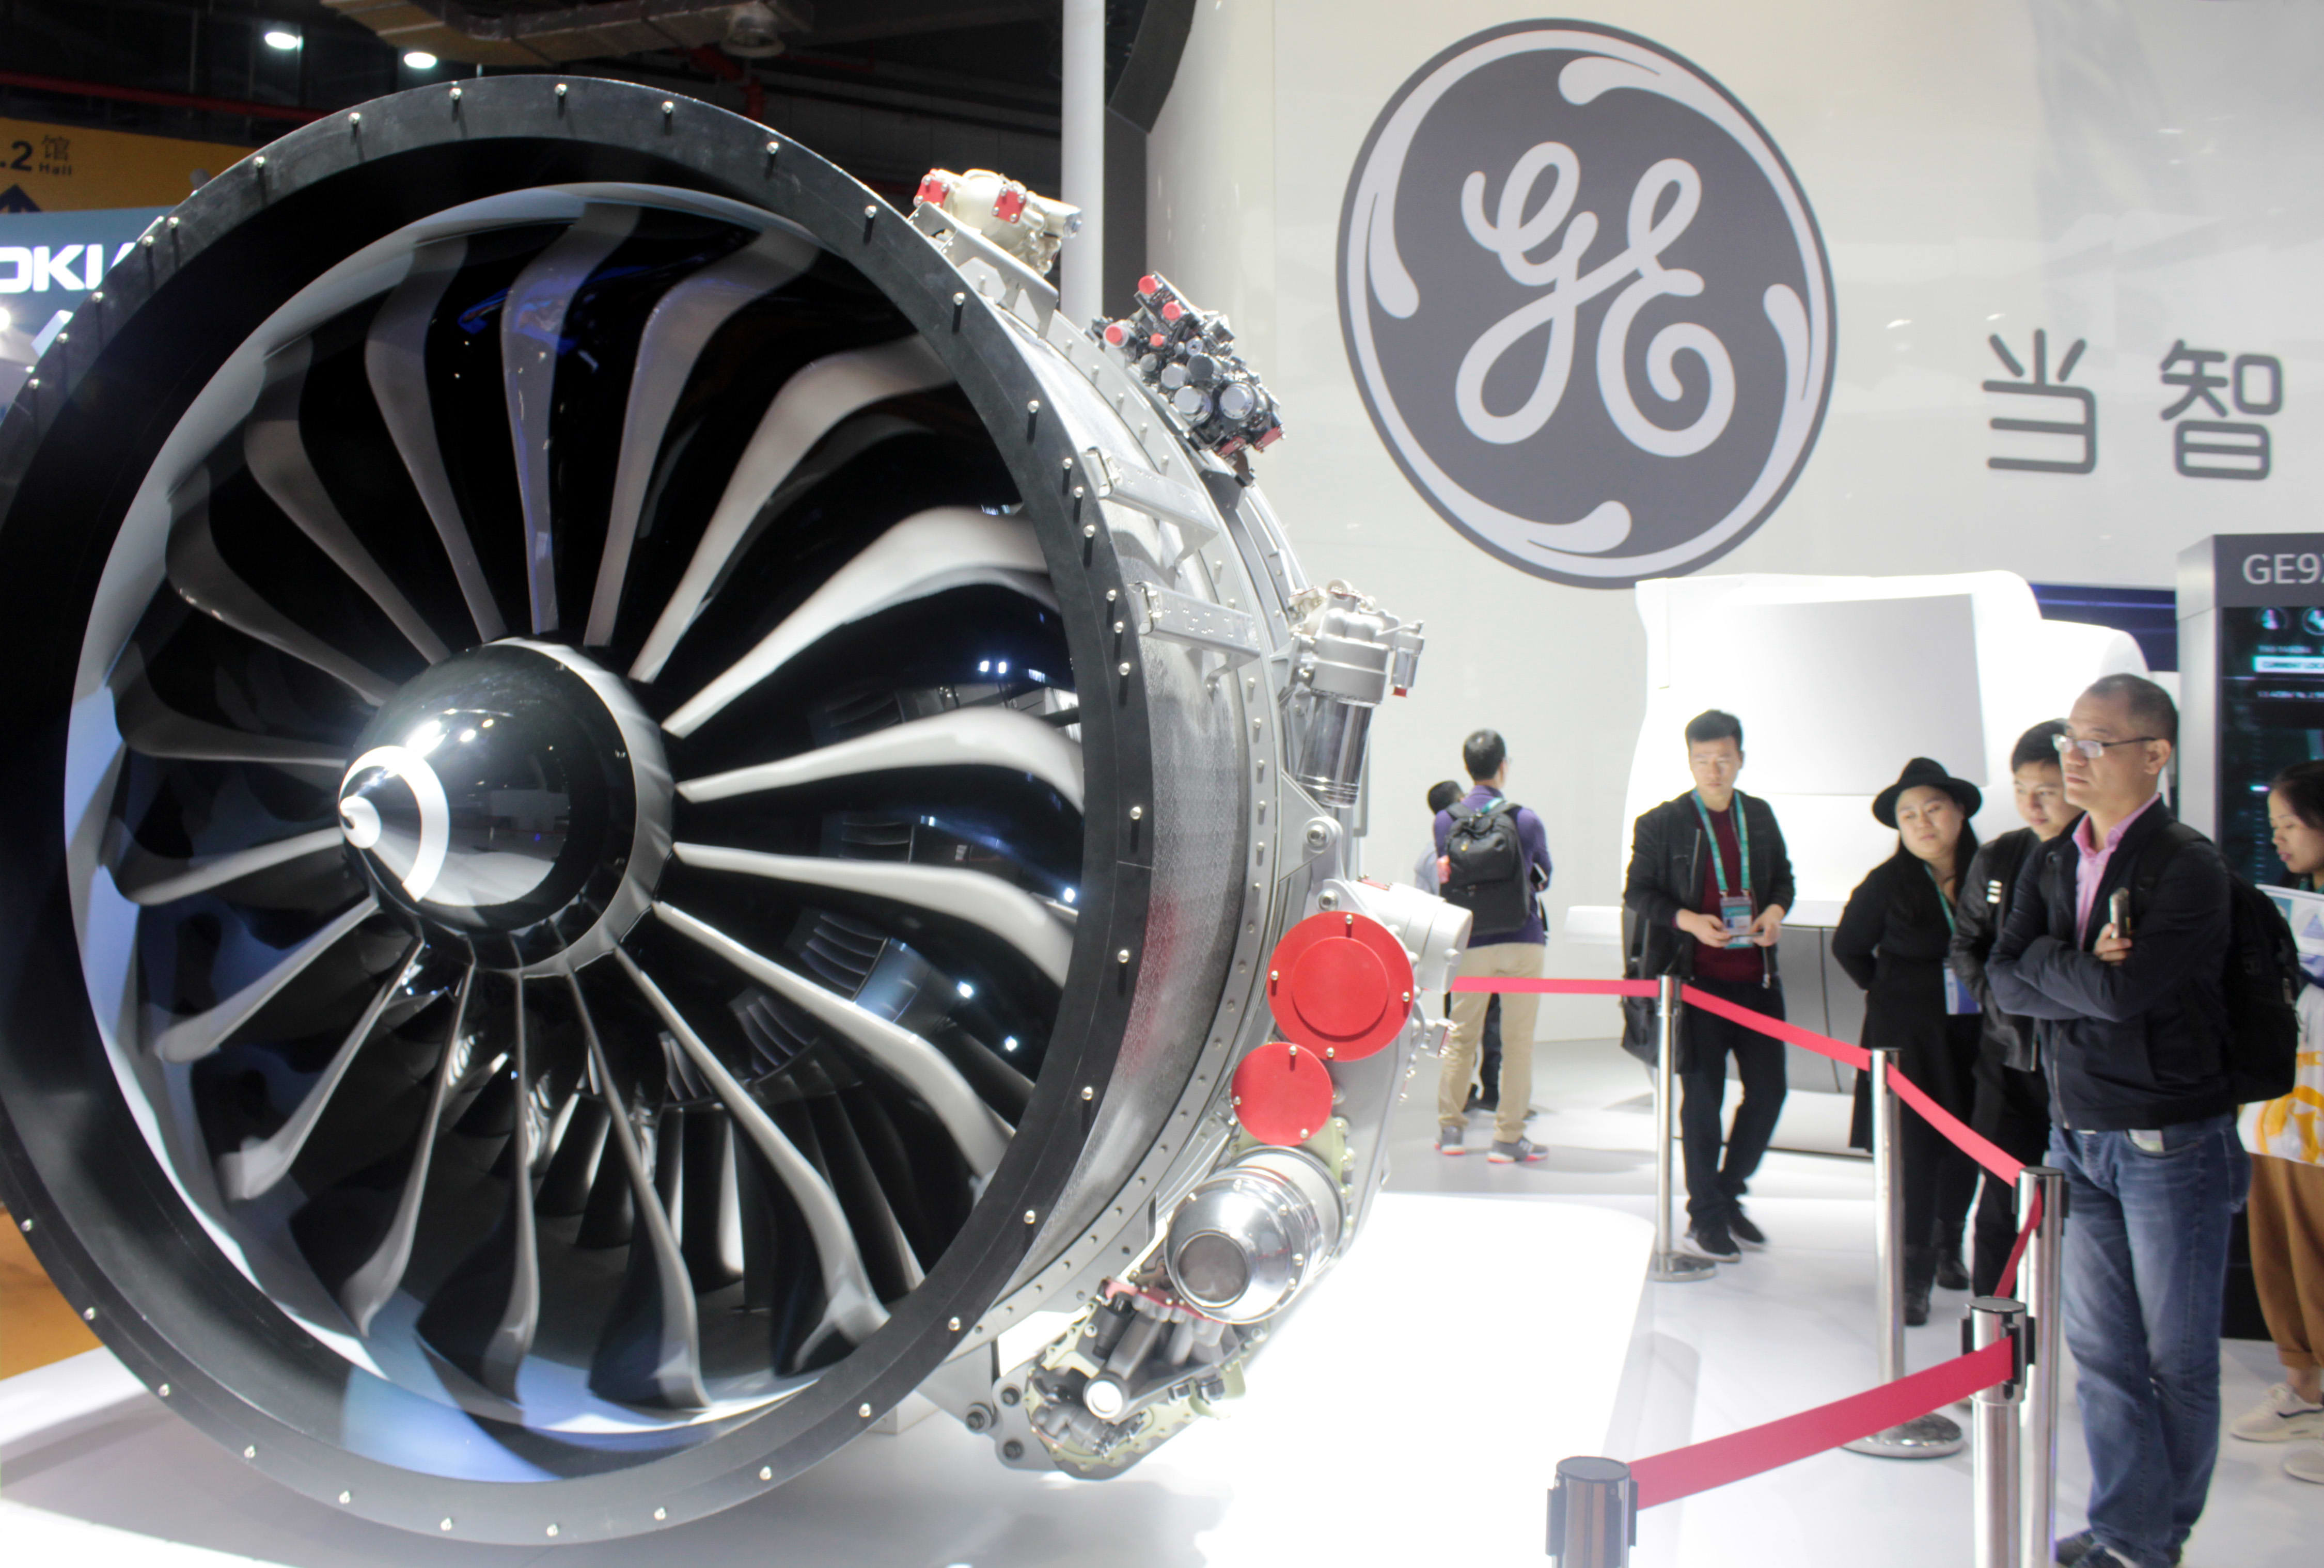 GE will divide into 3 companies with a focus on aviation, healthcare and energy